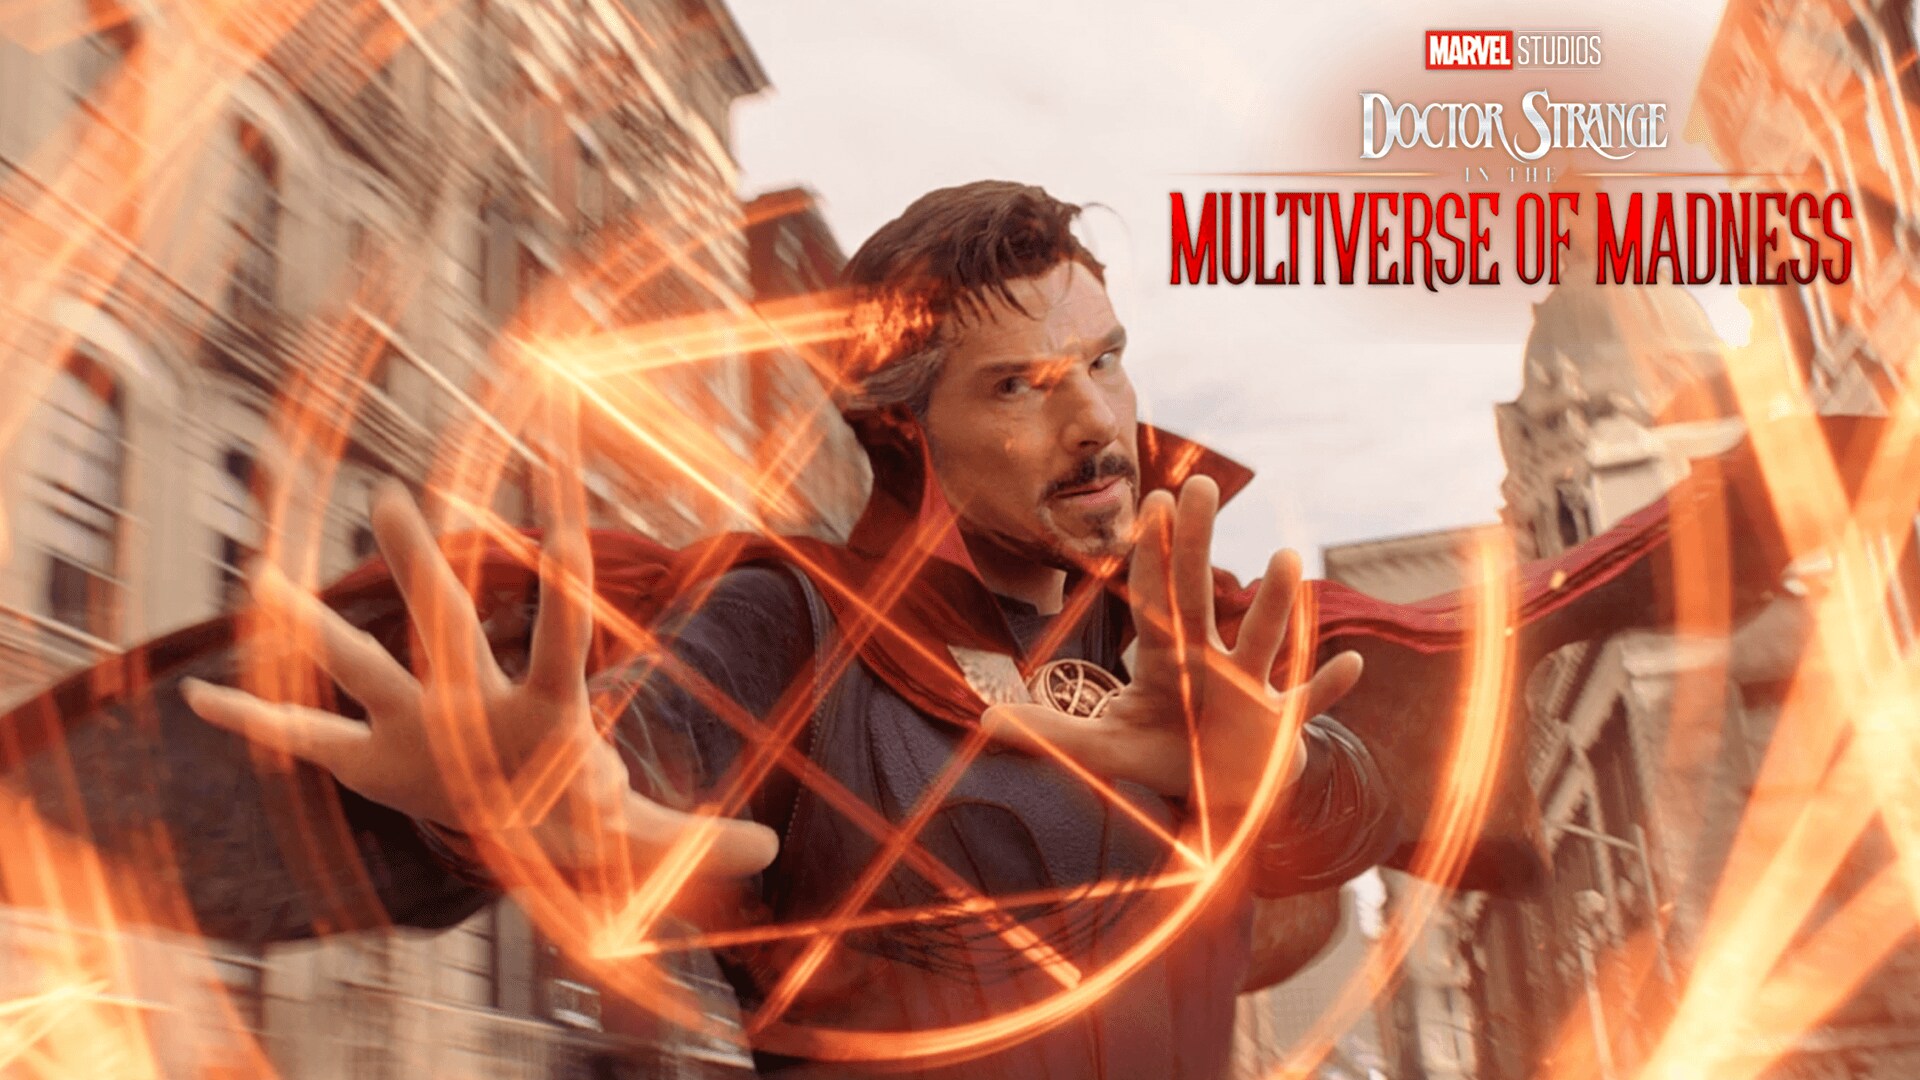 Marvel Studios’ Doctor Strange in the Multiverse of Madness | Tonight